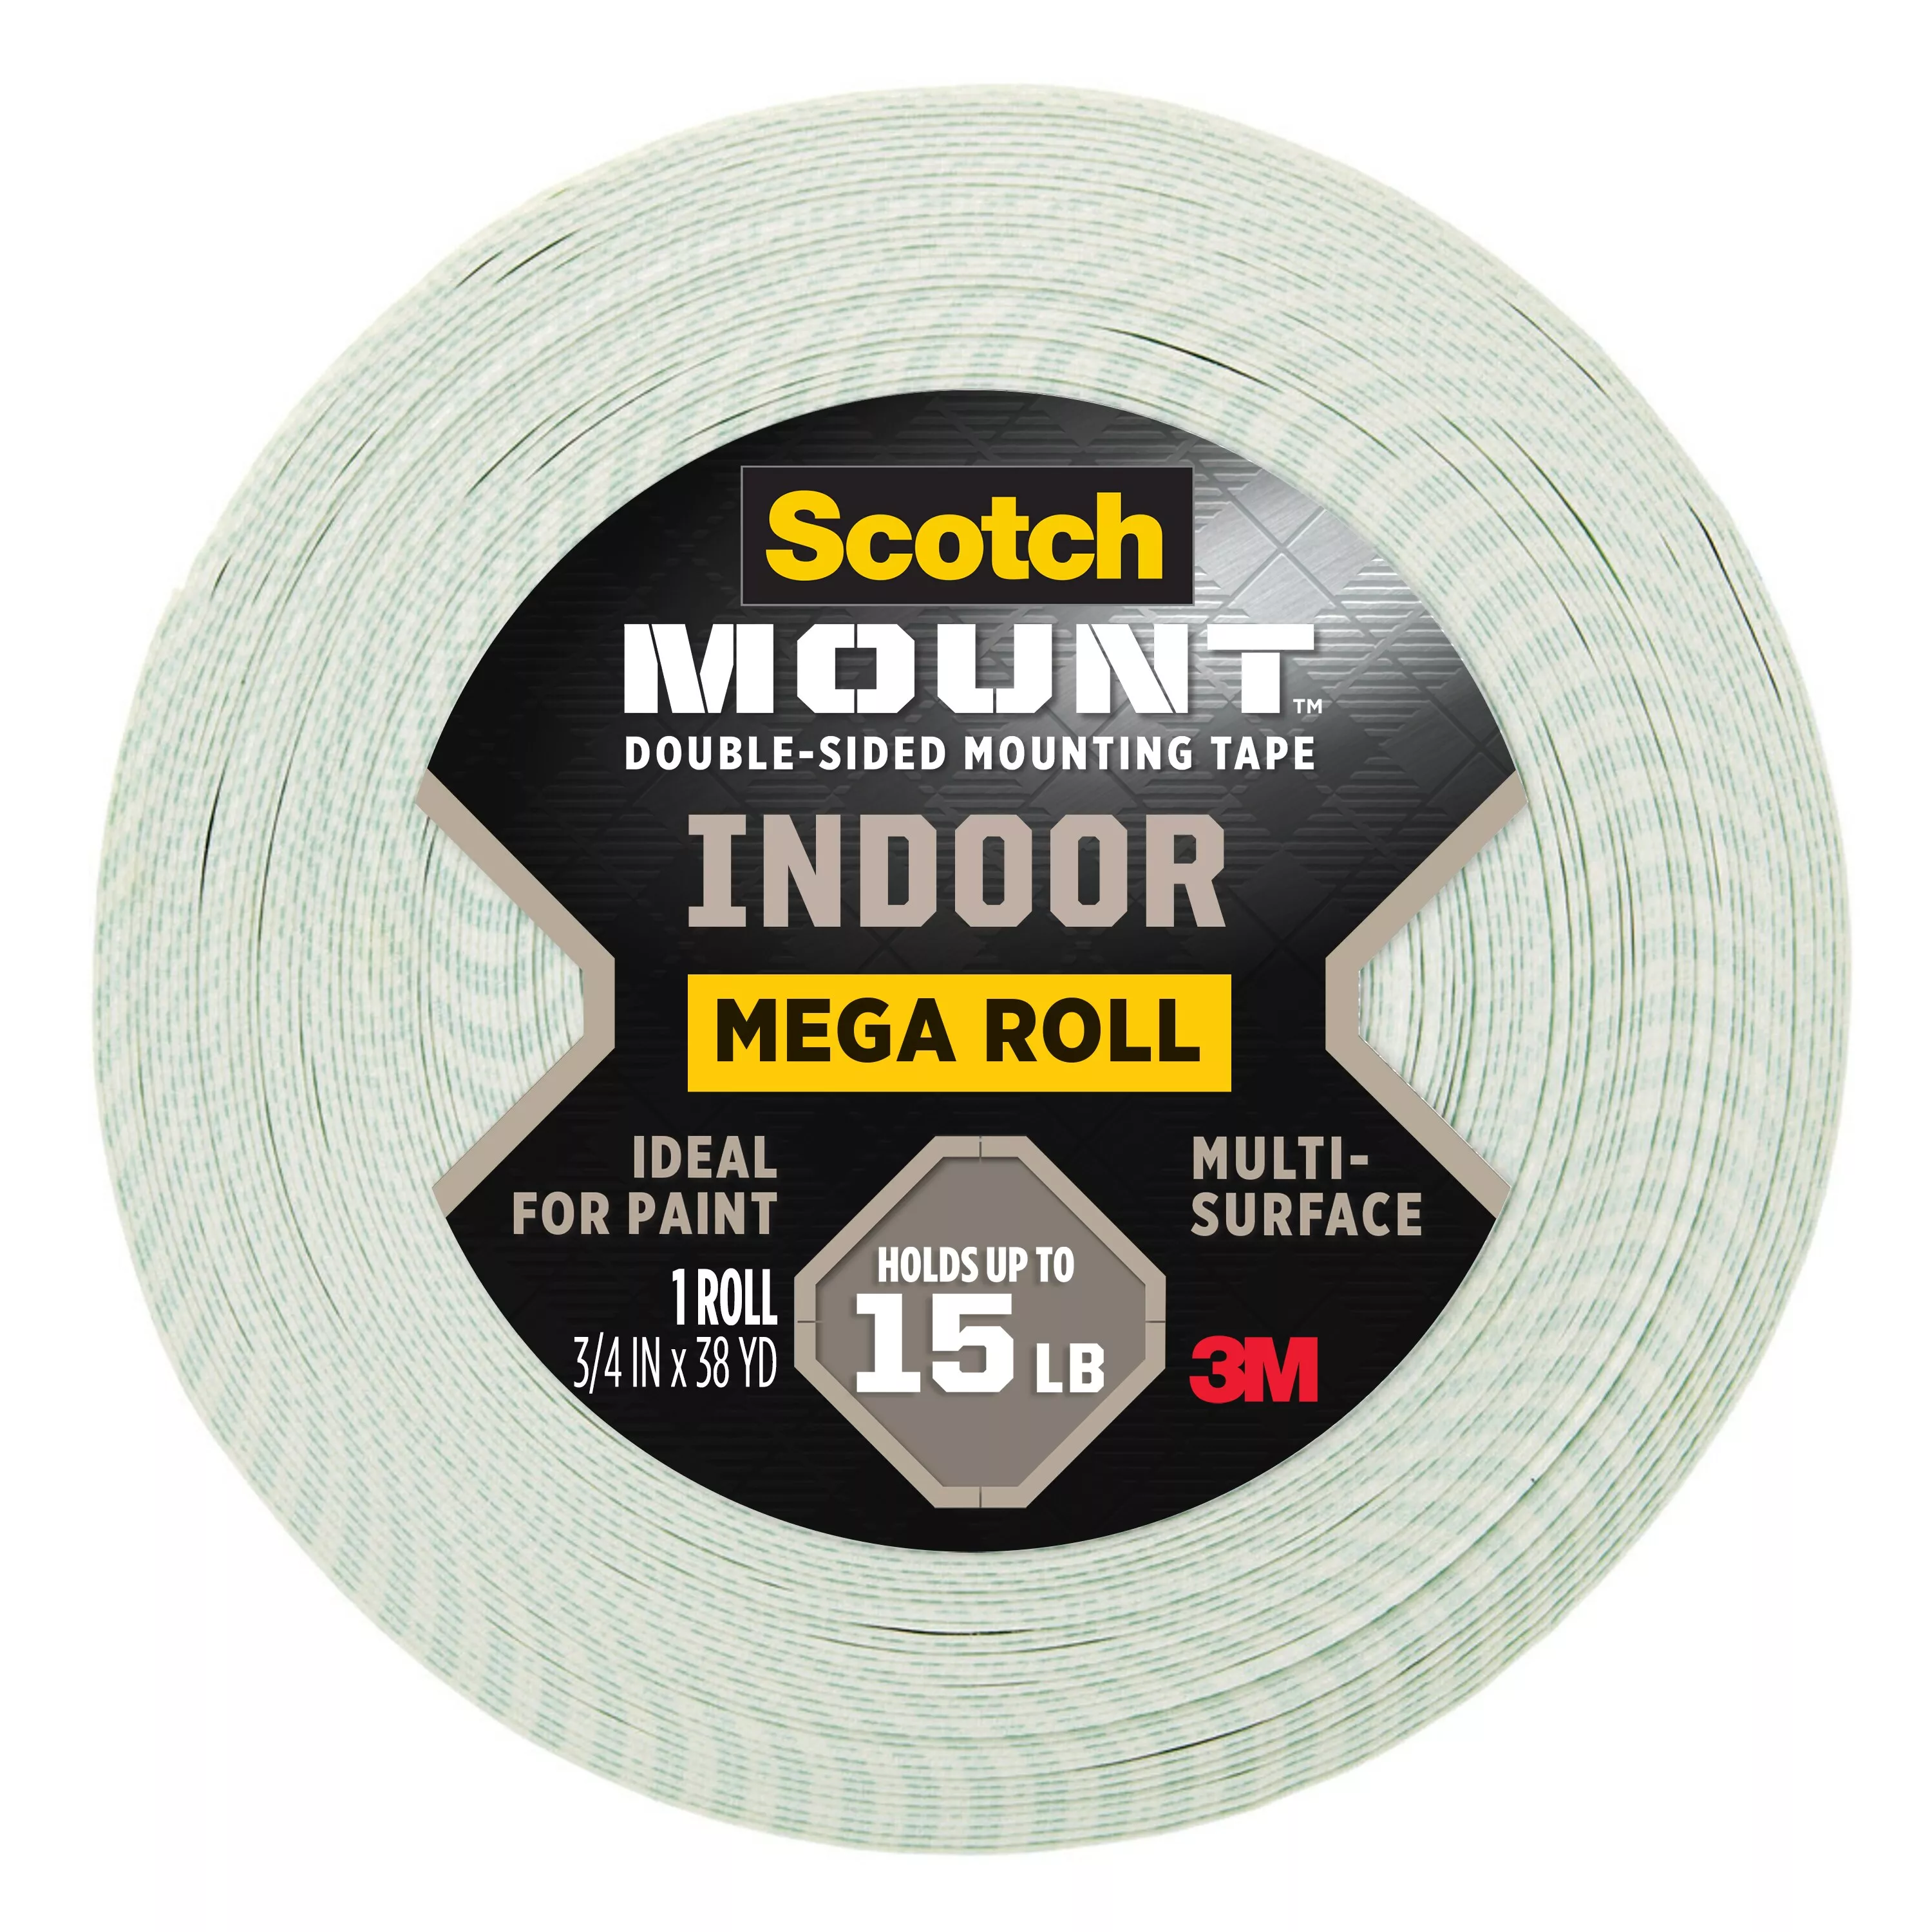 SKU 7100250334 | Scotch-Mount™ Indoor Double-Sided Mounting Tape 110H-MR